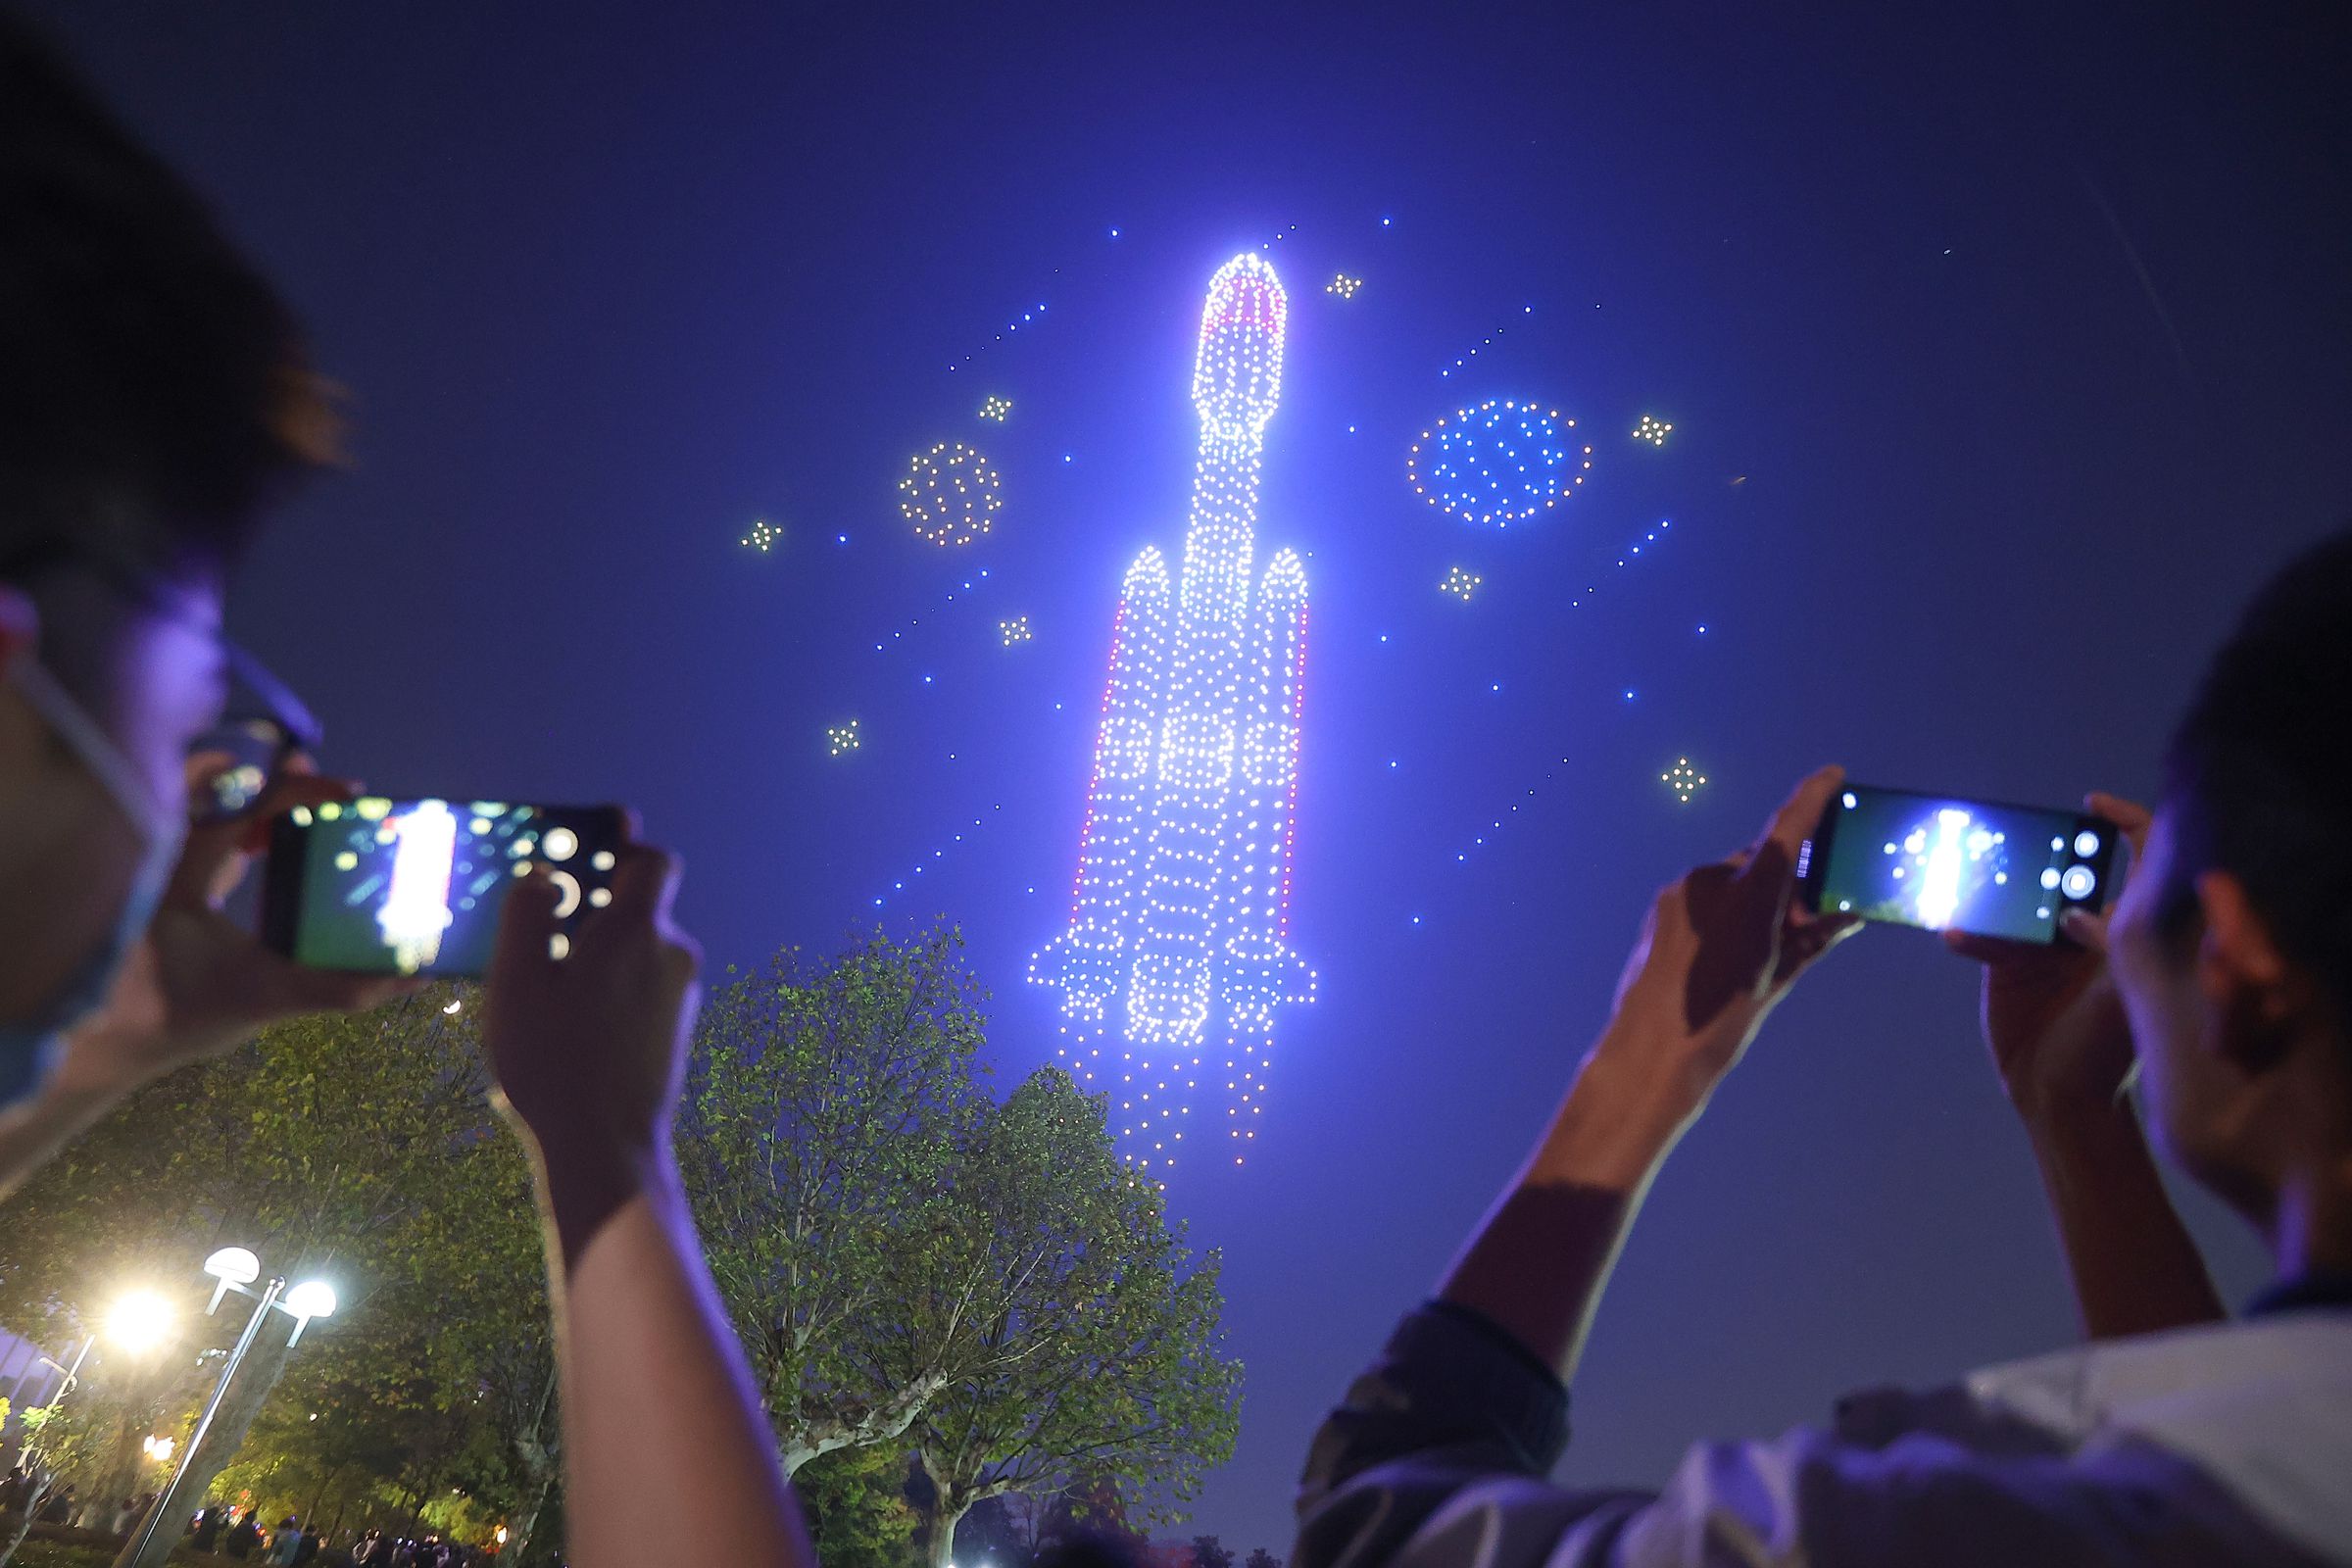 2,022 drones performing in a light show to celebrate the 70th anniversary of a local university in Nanjing, China. The drones have formed a rocket, and bystanders are taking pictures on their mobile devices.